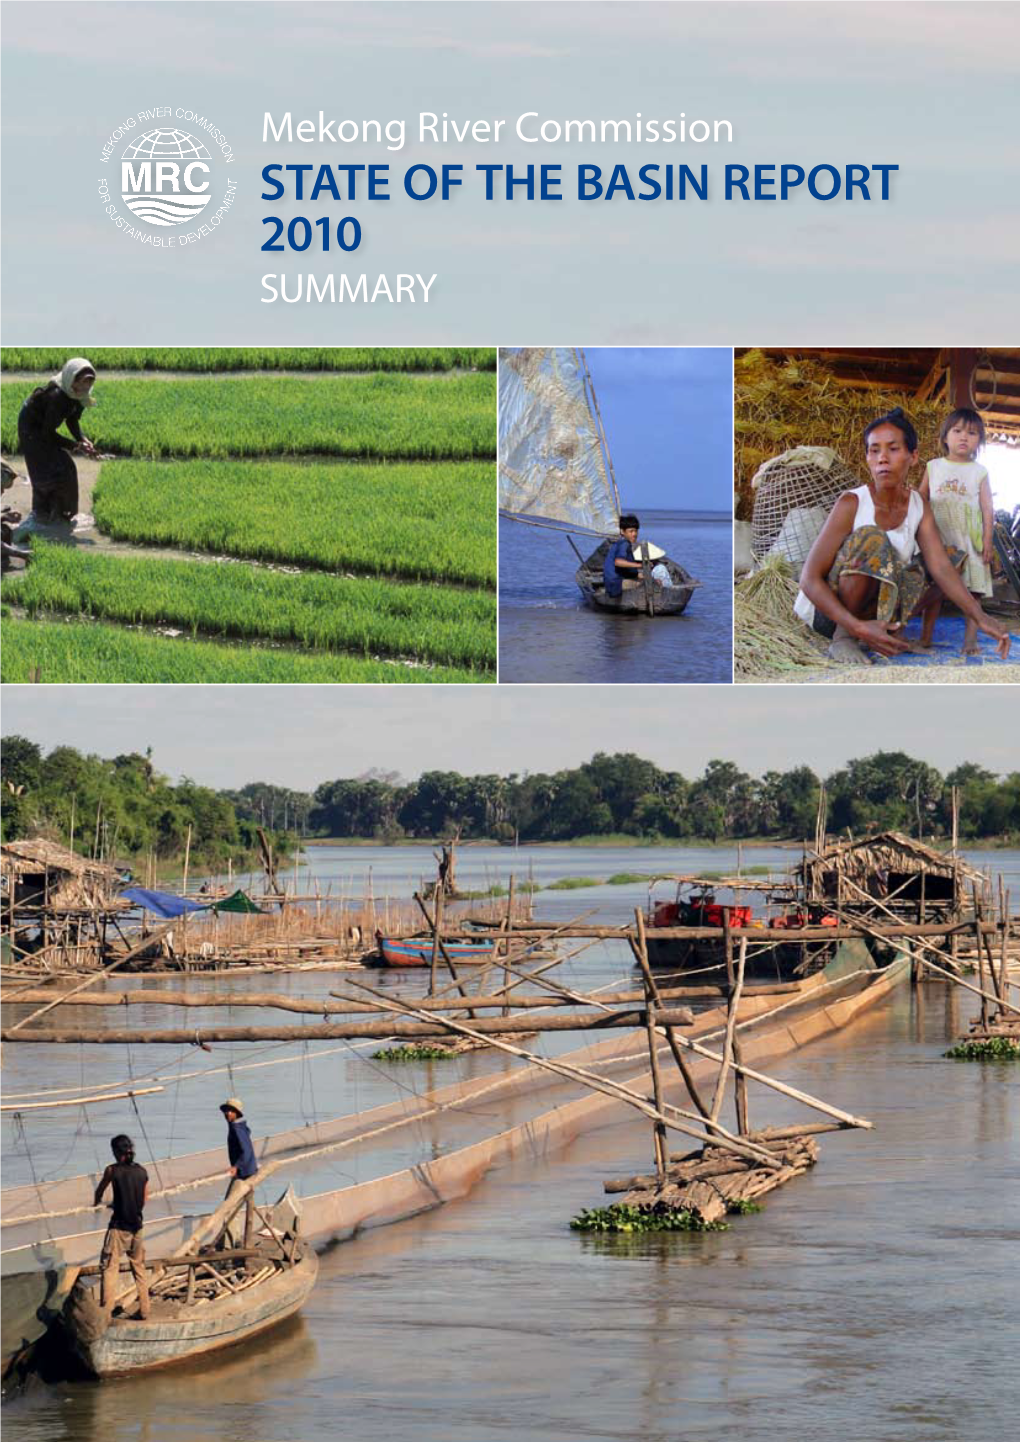 State of the Basin Report 2010 (Summary, English)